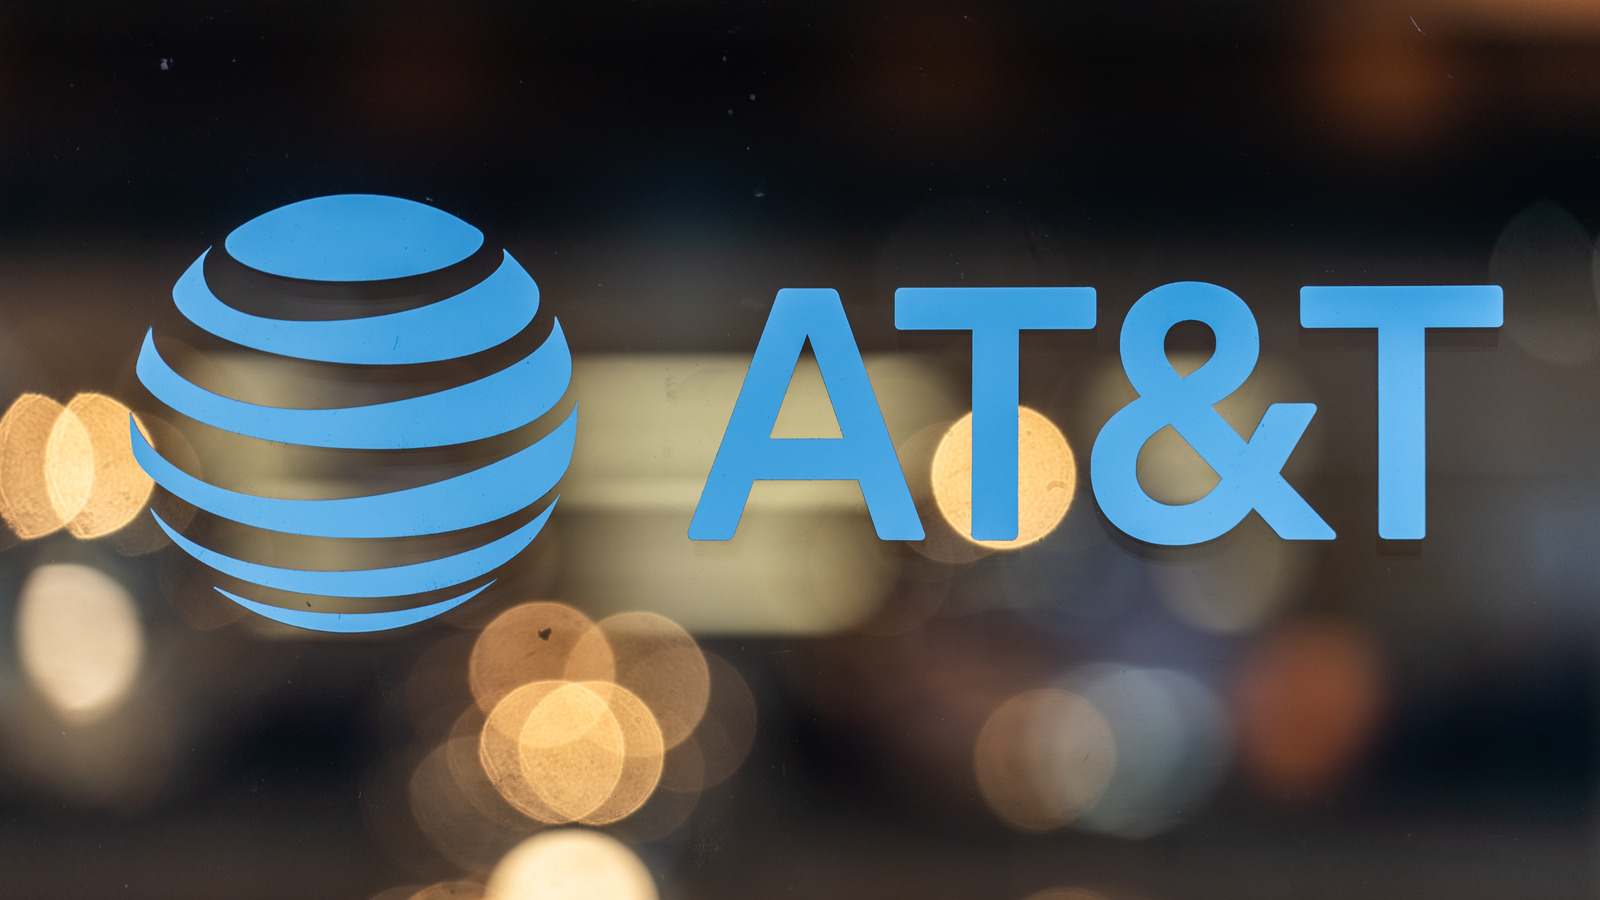 AT&T Resets Passcodes for Millions After Data Leak